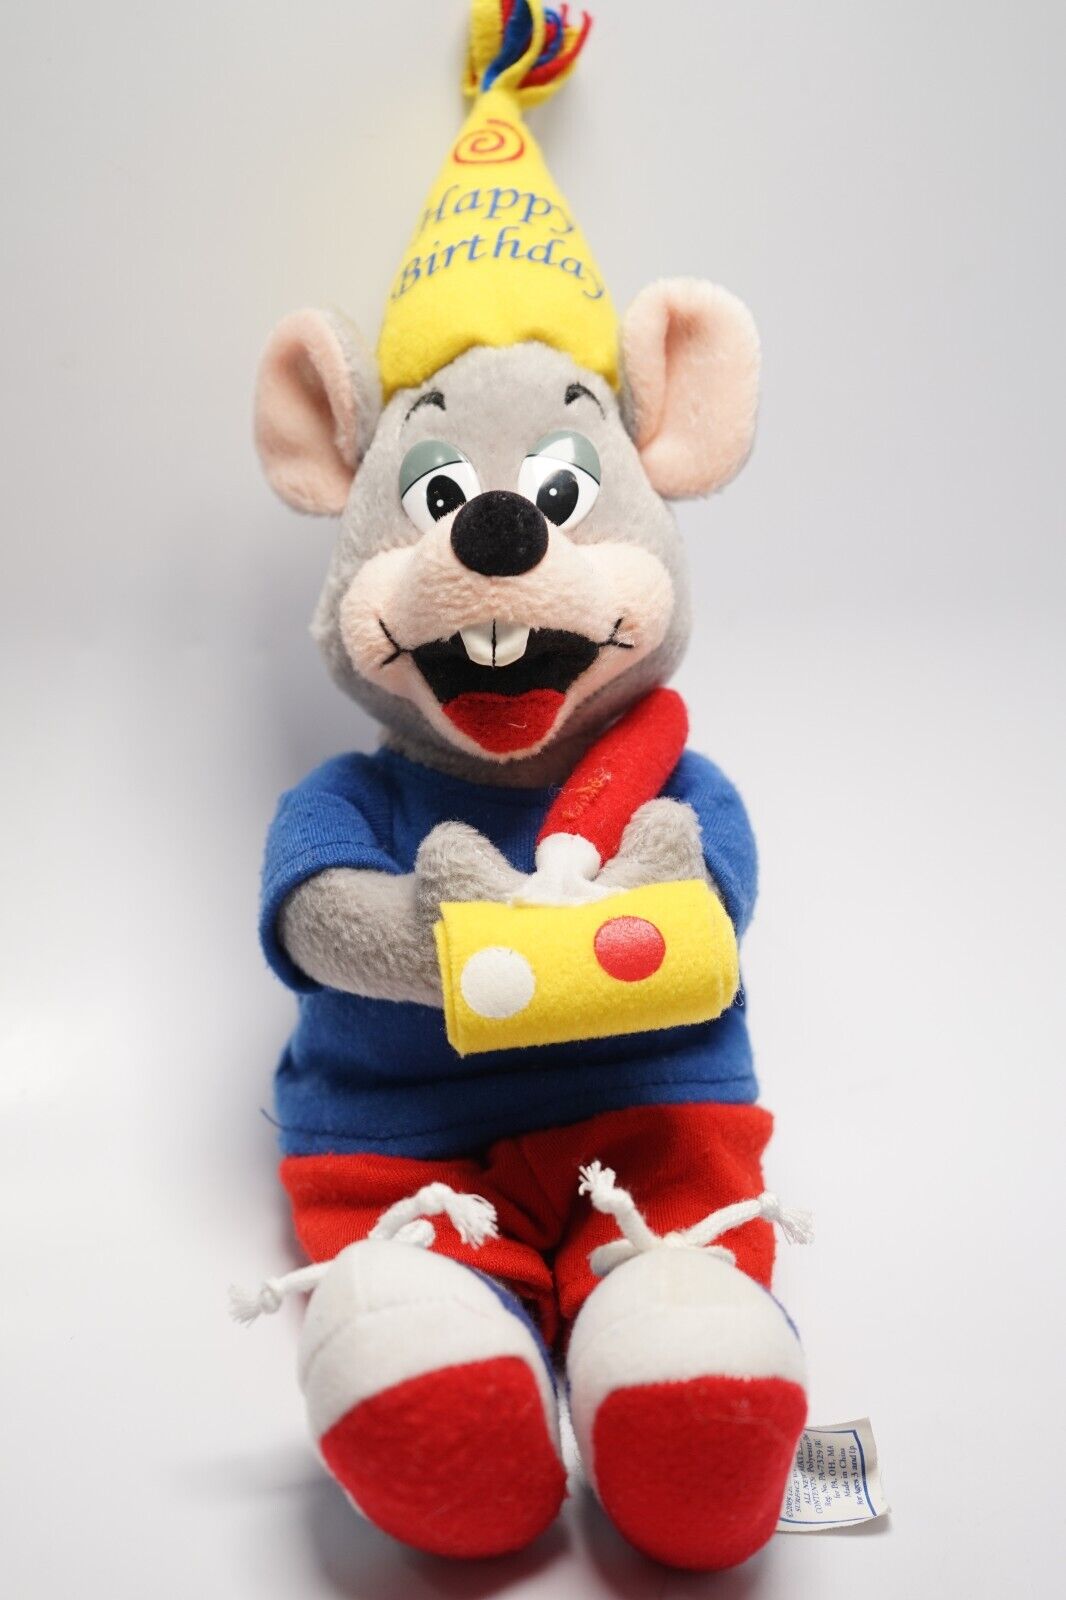 Vintage Chuck E Cheese 2005 Birthday Plush Stuffed animal Mouse Limited Edition